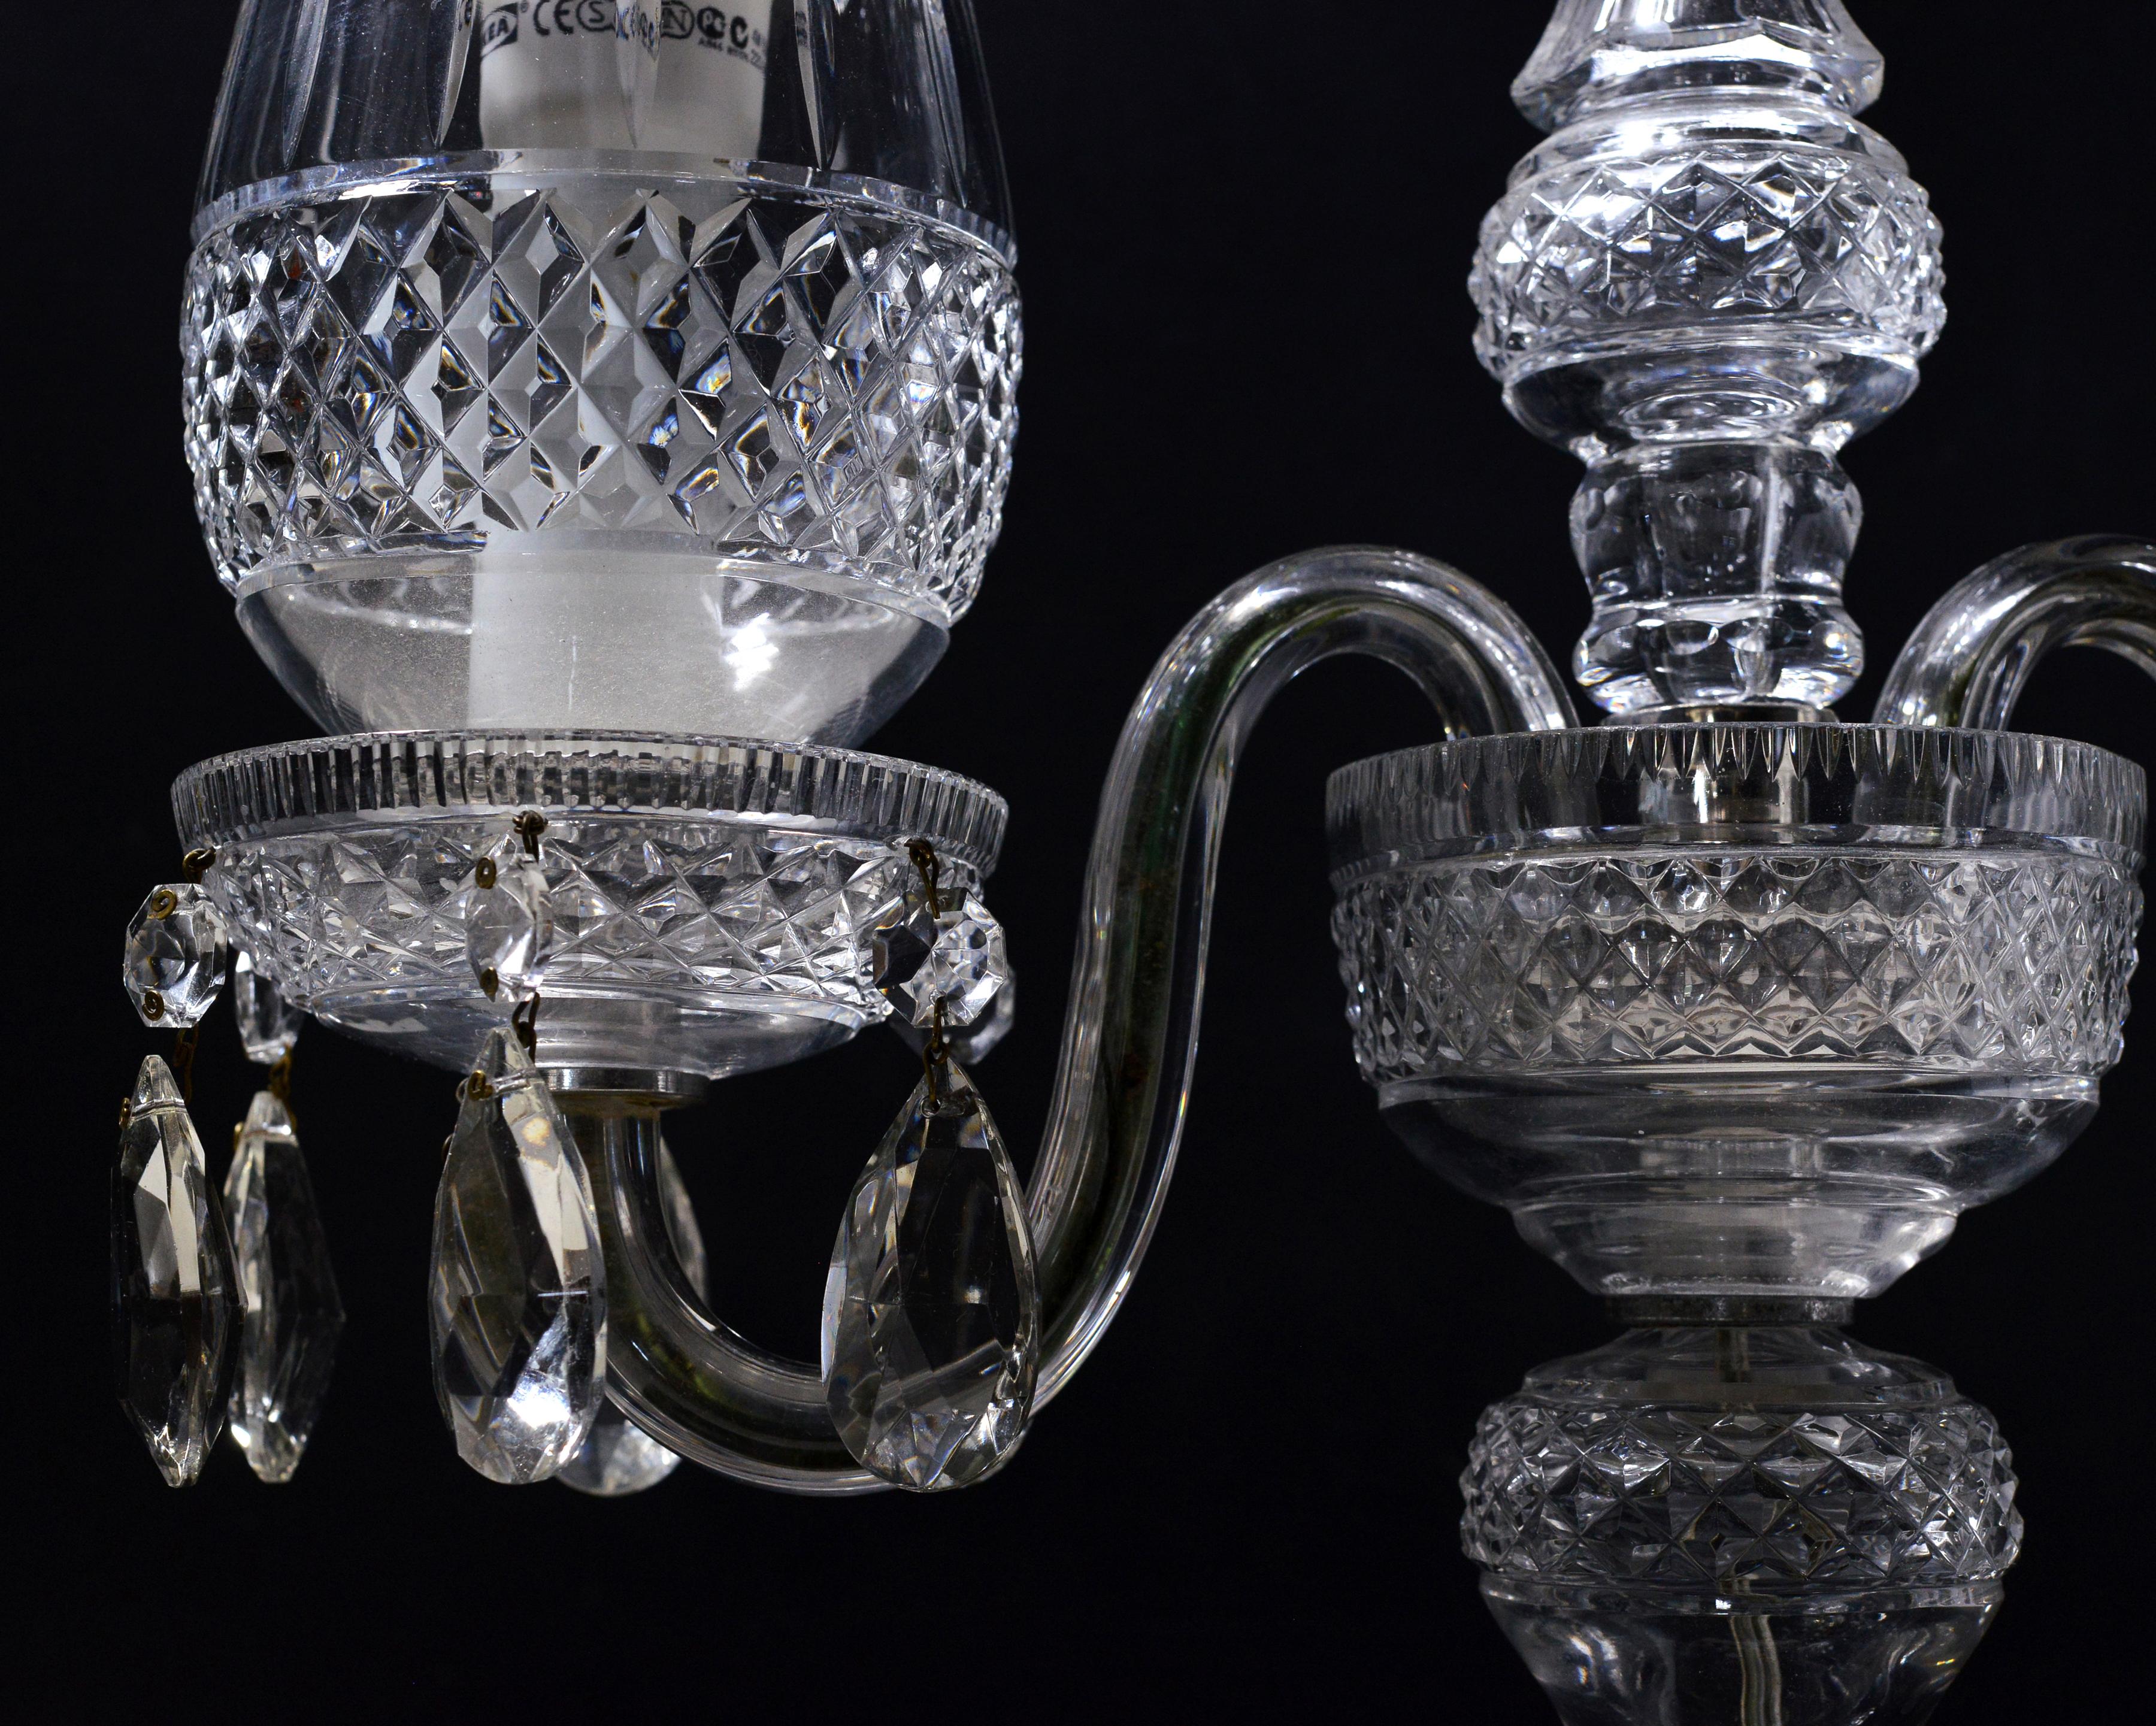 Vintage Crystal Candelabra Double Hurricane Lamp Baccarat style 20th century In Good Condition For Sale In Sweden, SE